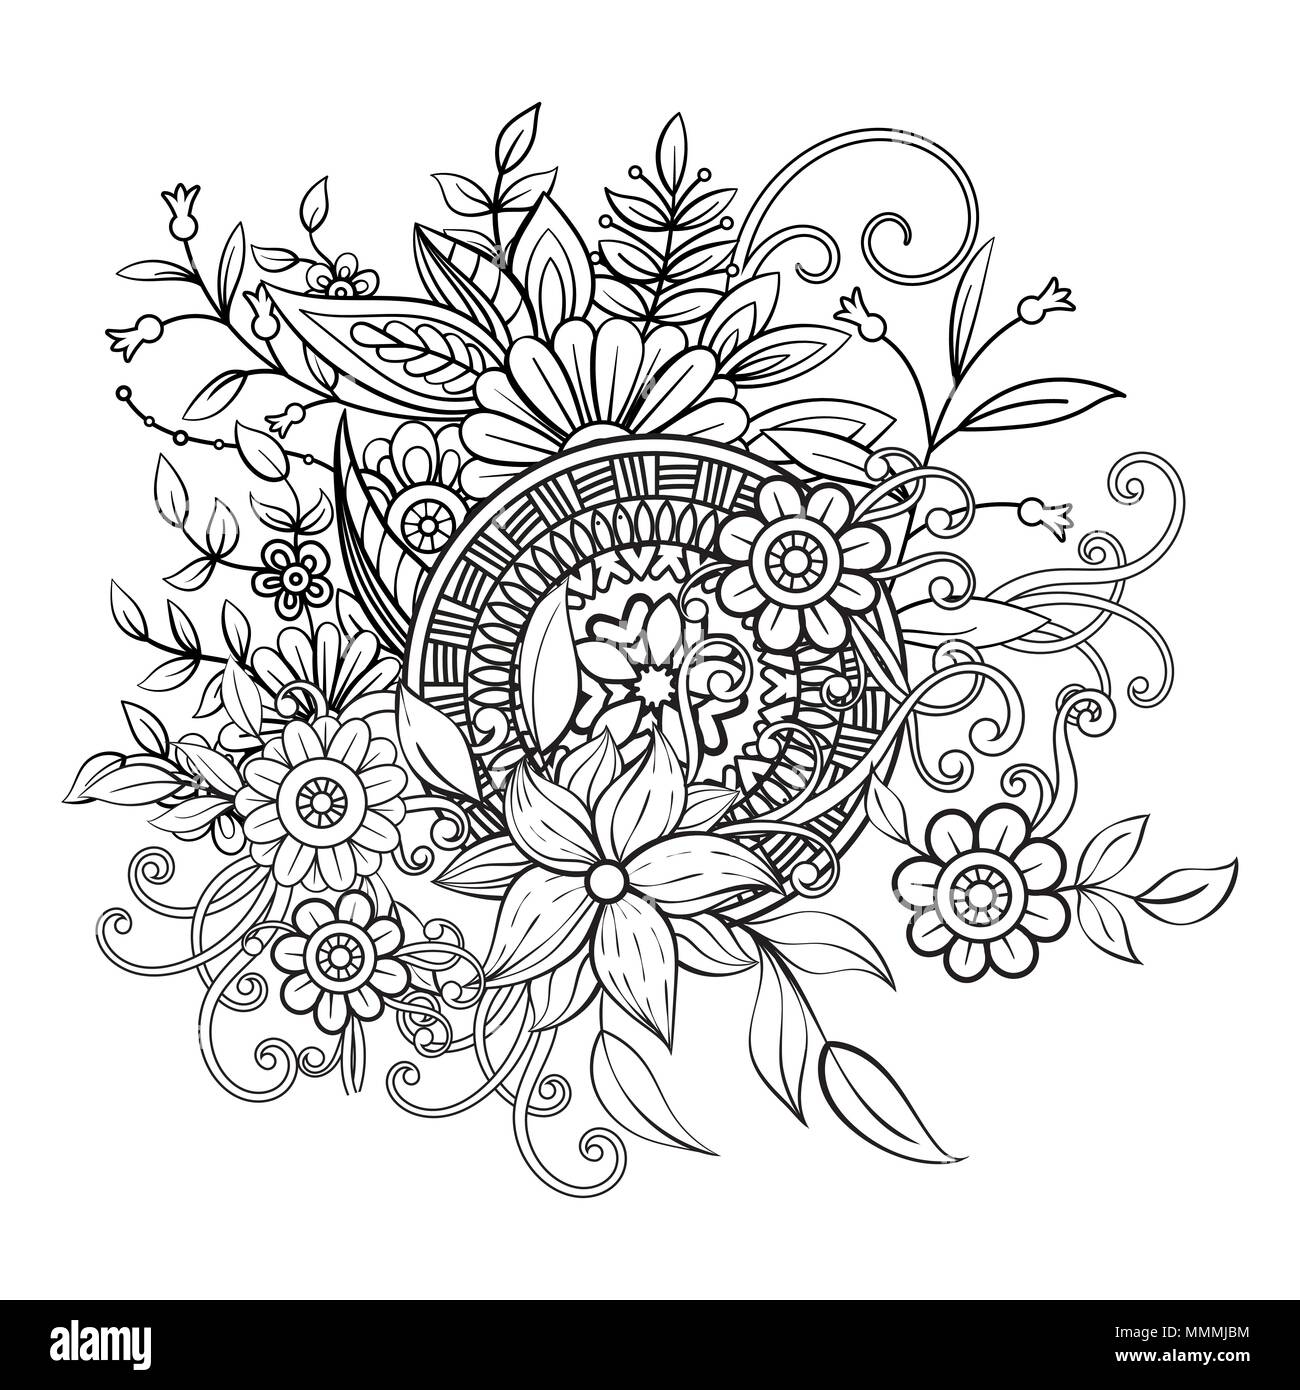 Floral pattern in black and white. Adult coloring book page with flowers and mandala. Art therapy, anti stress coloring page. Hand drawn vector illustration Stock Vector